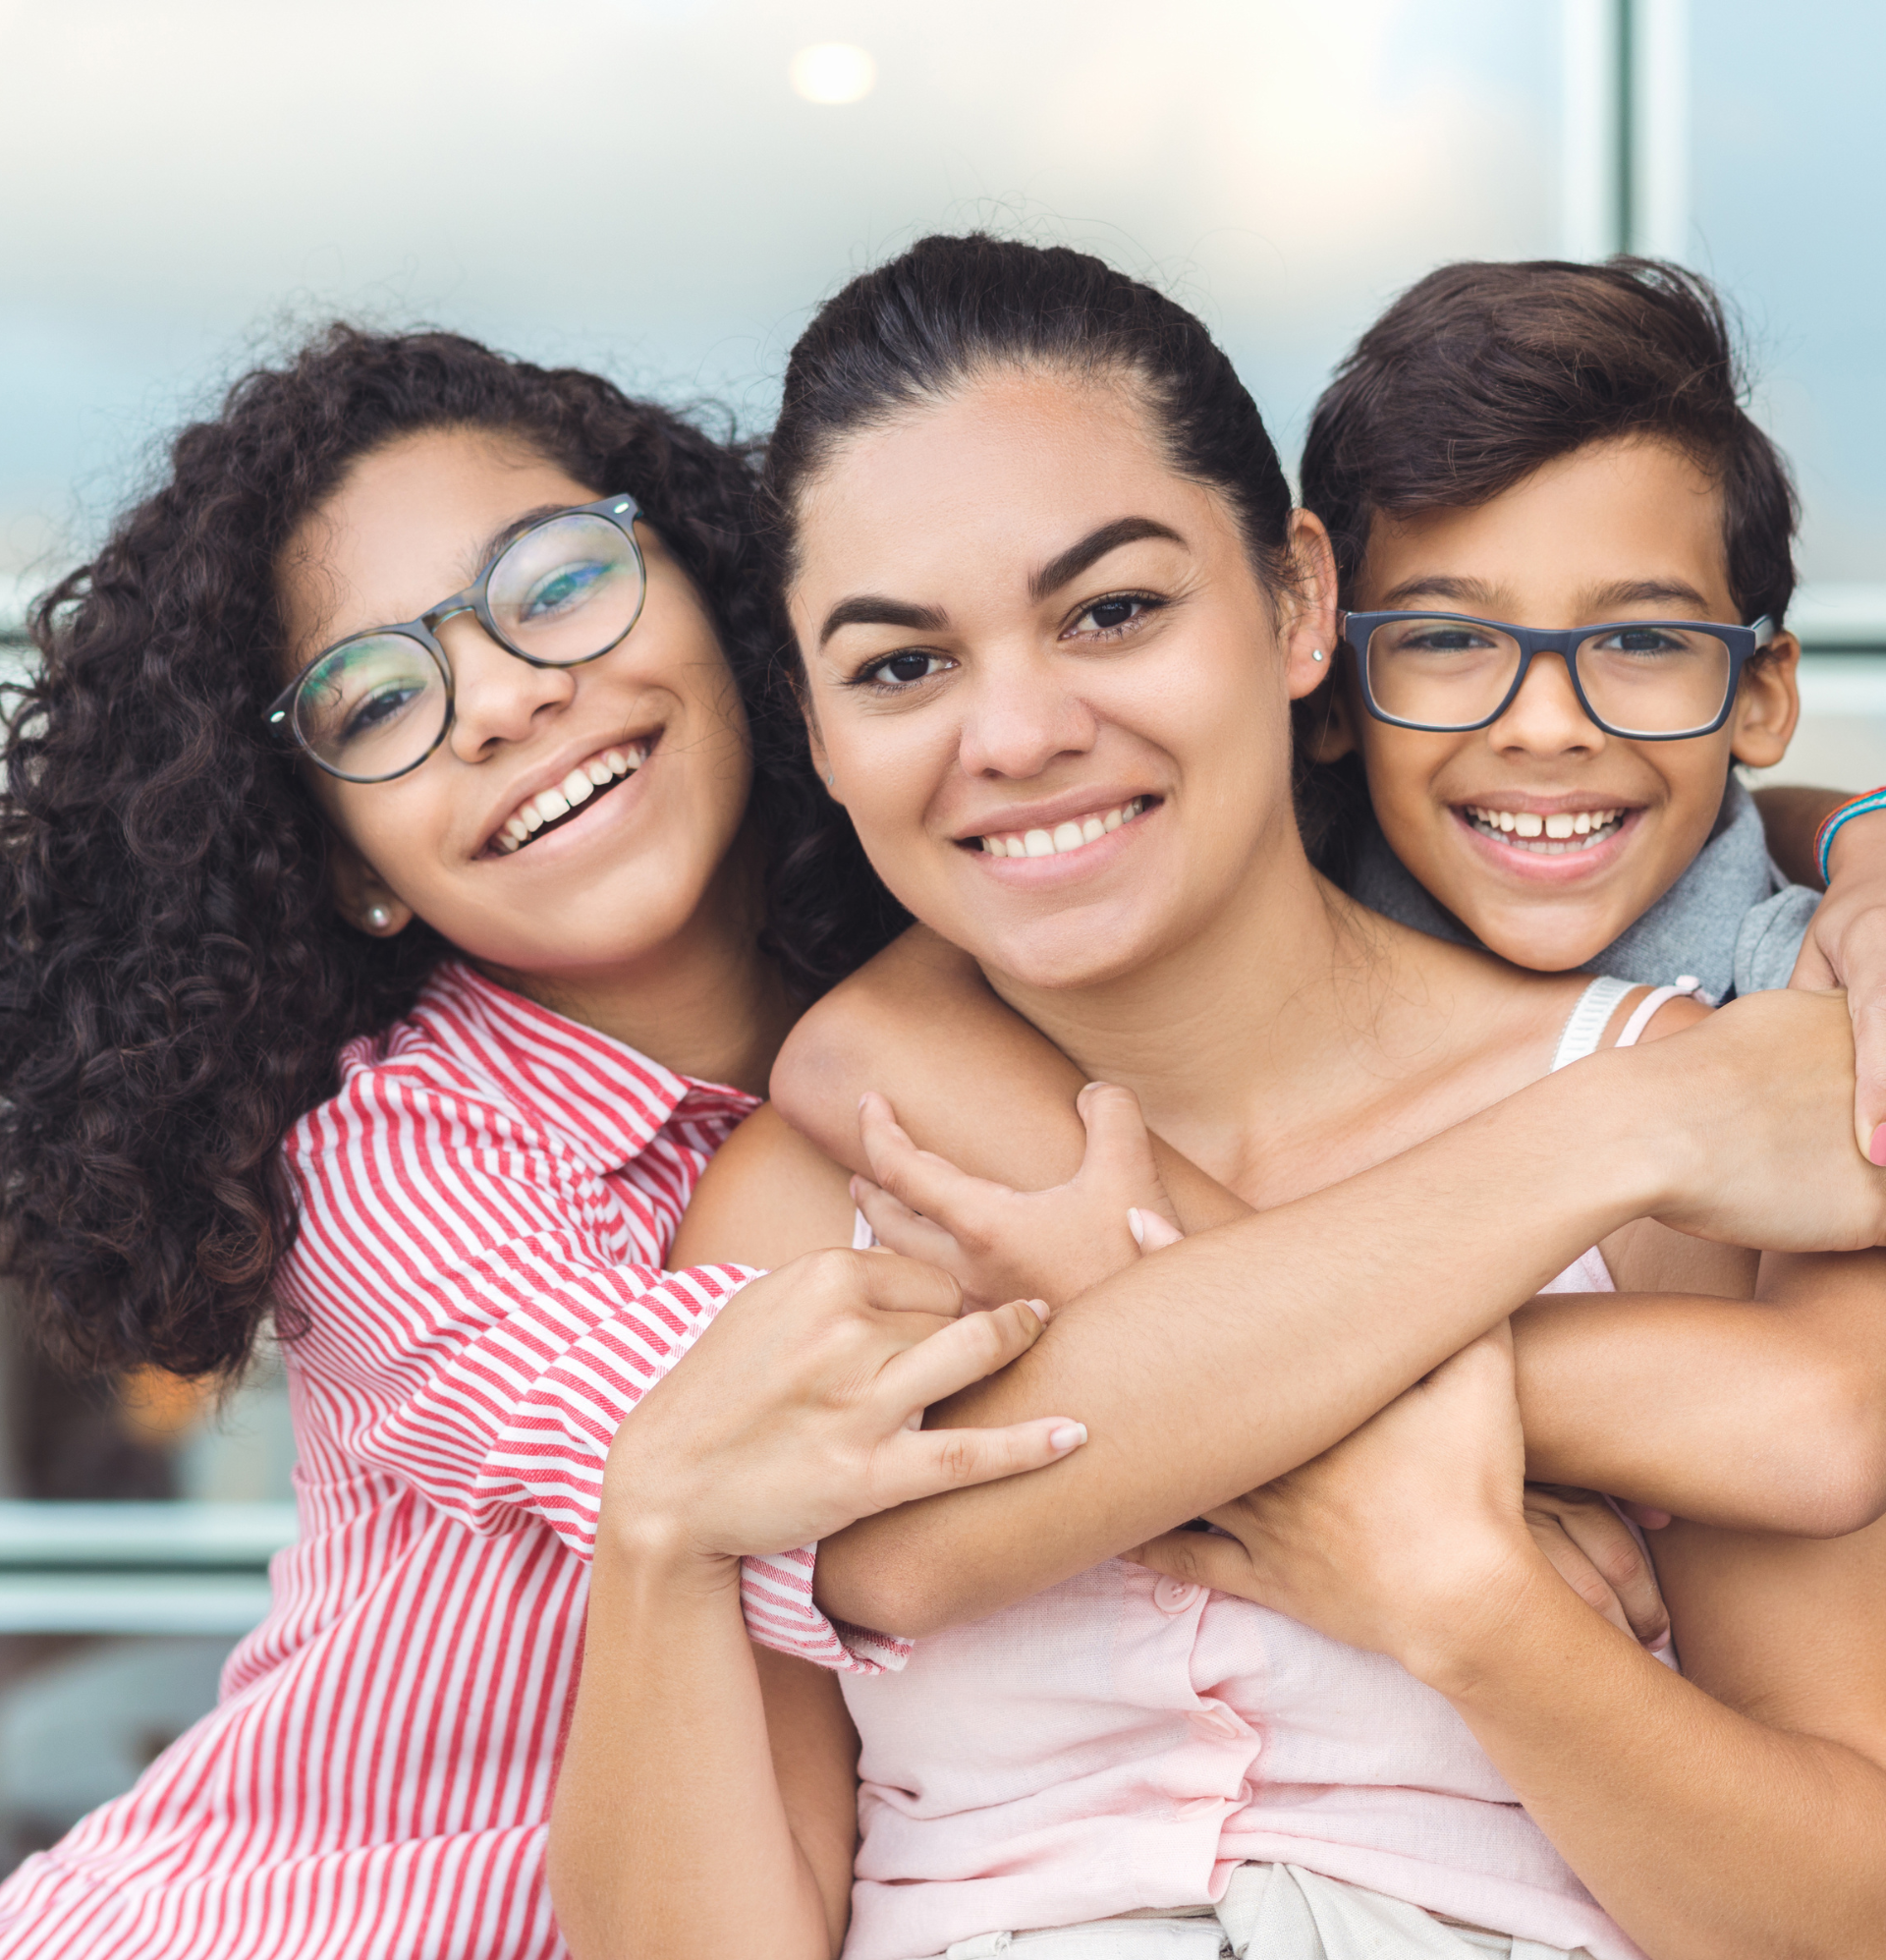 FAMILY DENTISTRY IN ESCONDIDO | Mom and kids smiling | Best family dentist in Escondido CA